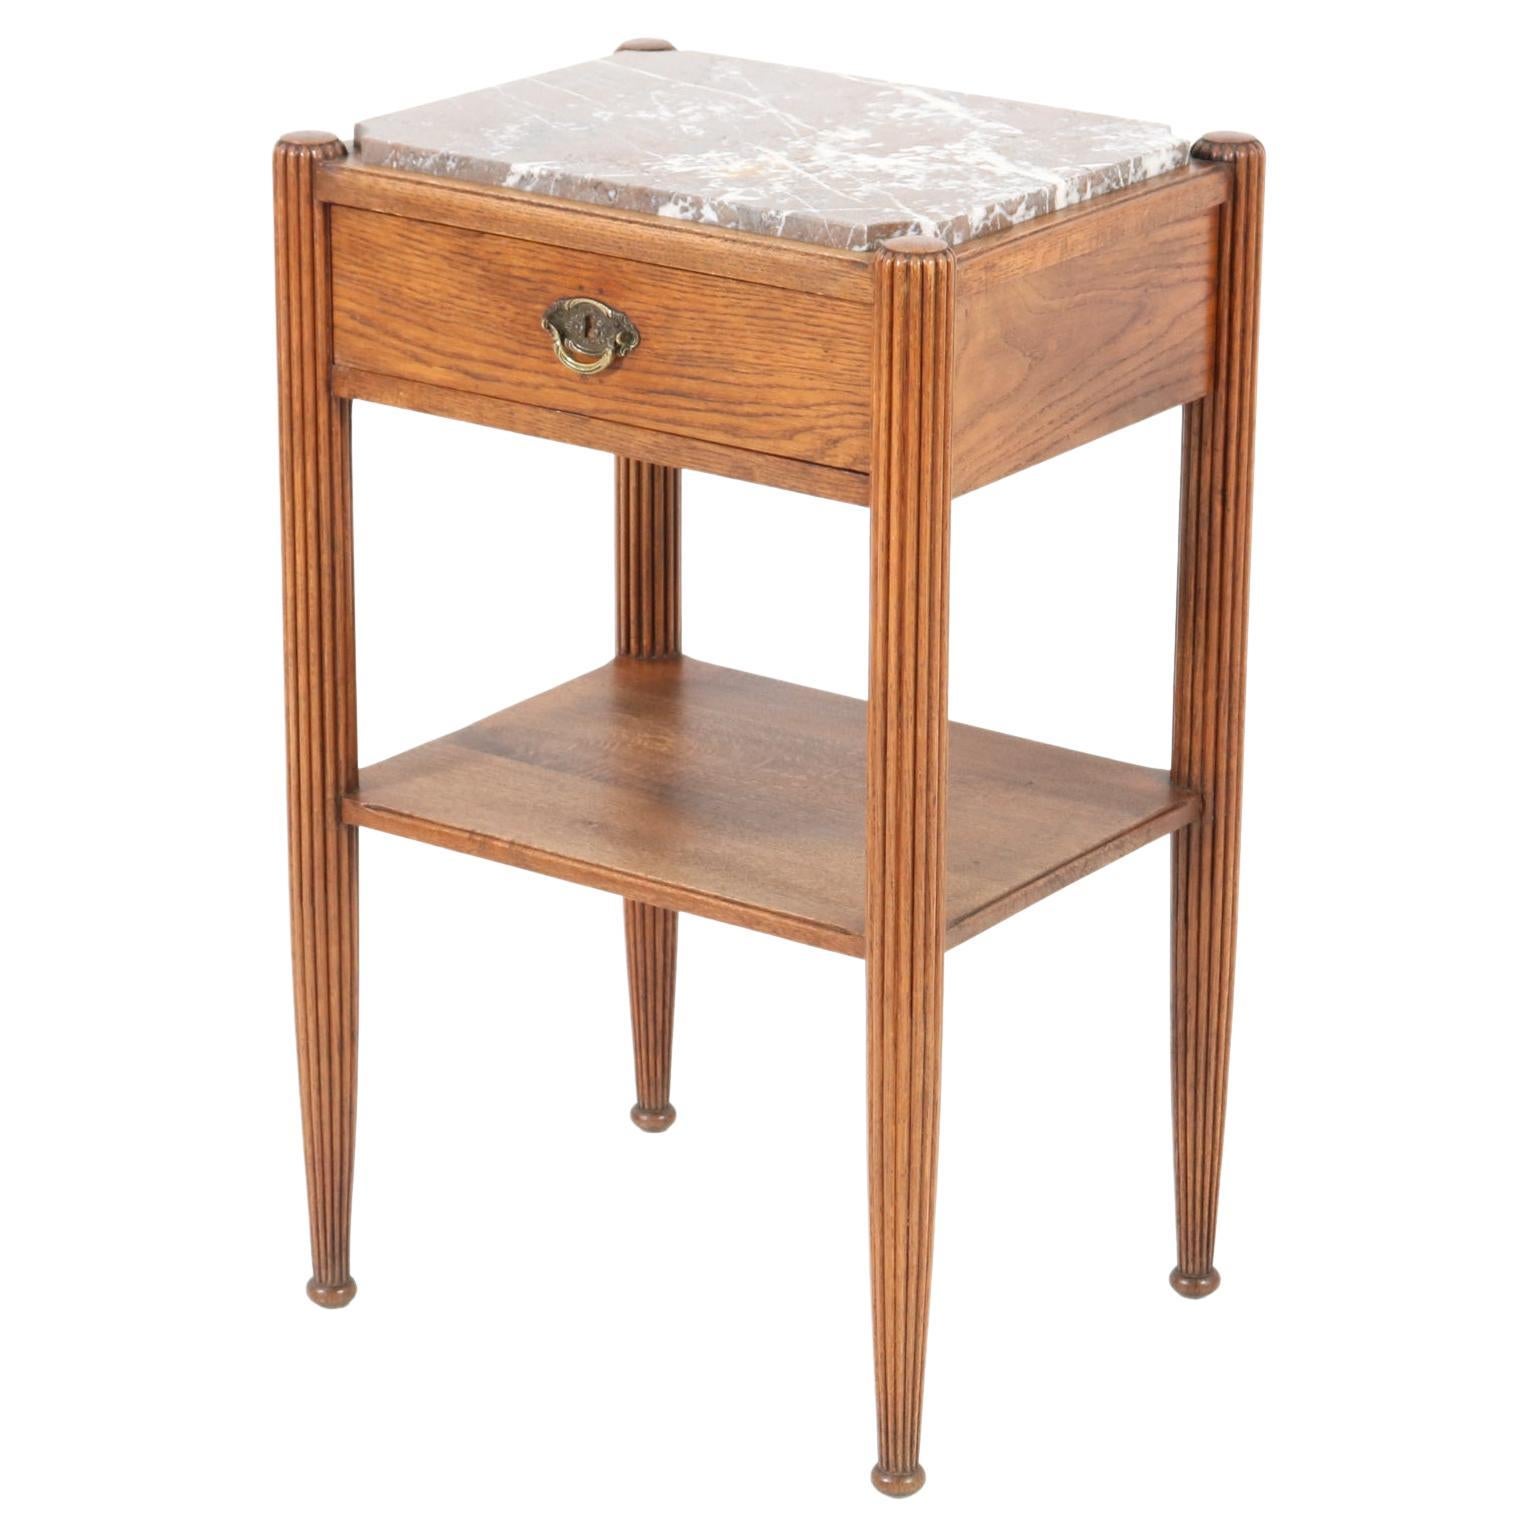 Oak Art Deco Side Table with Marble Top, 1930s